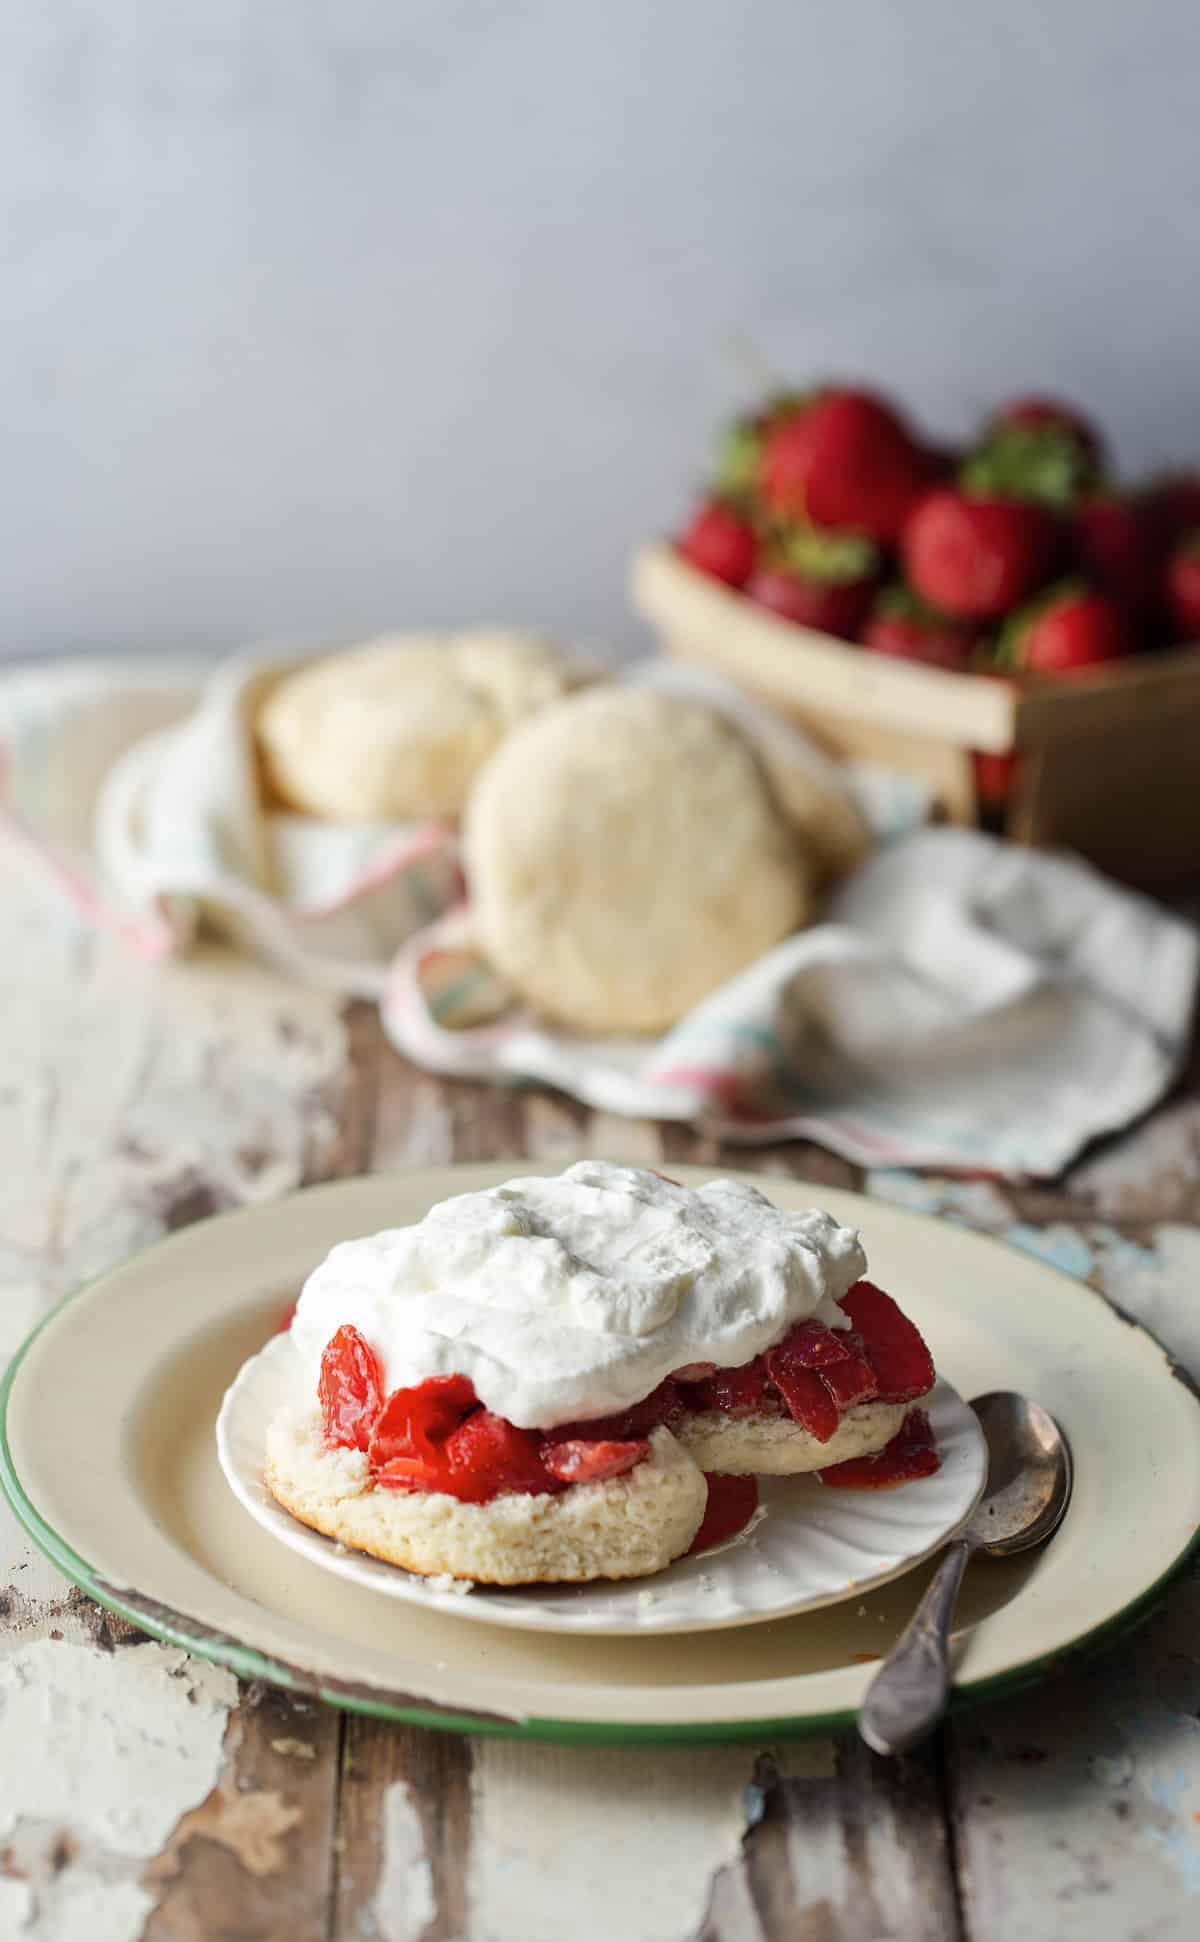 strawberry shortcake topped with whipped cream